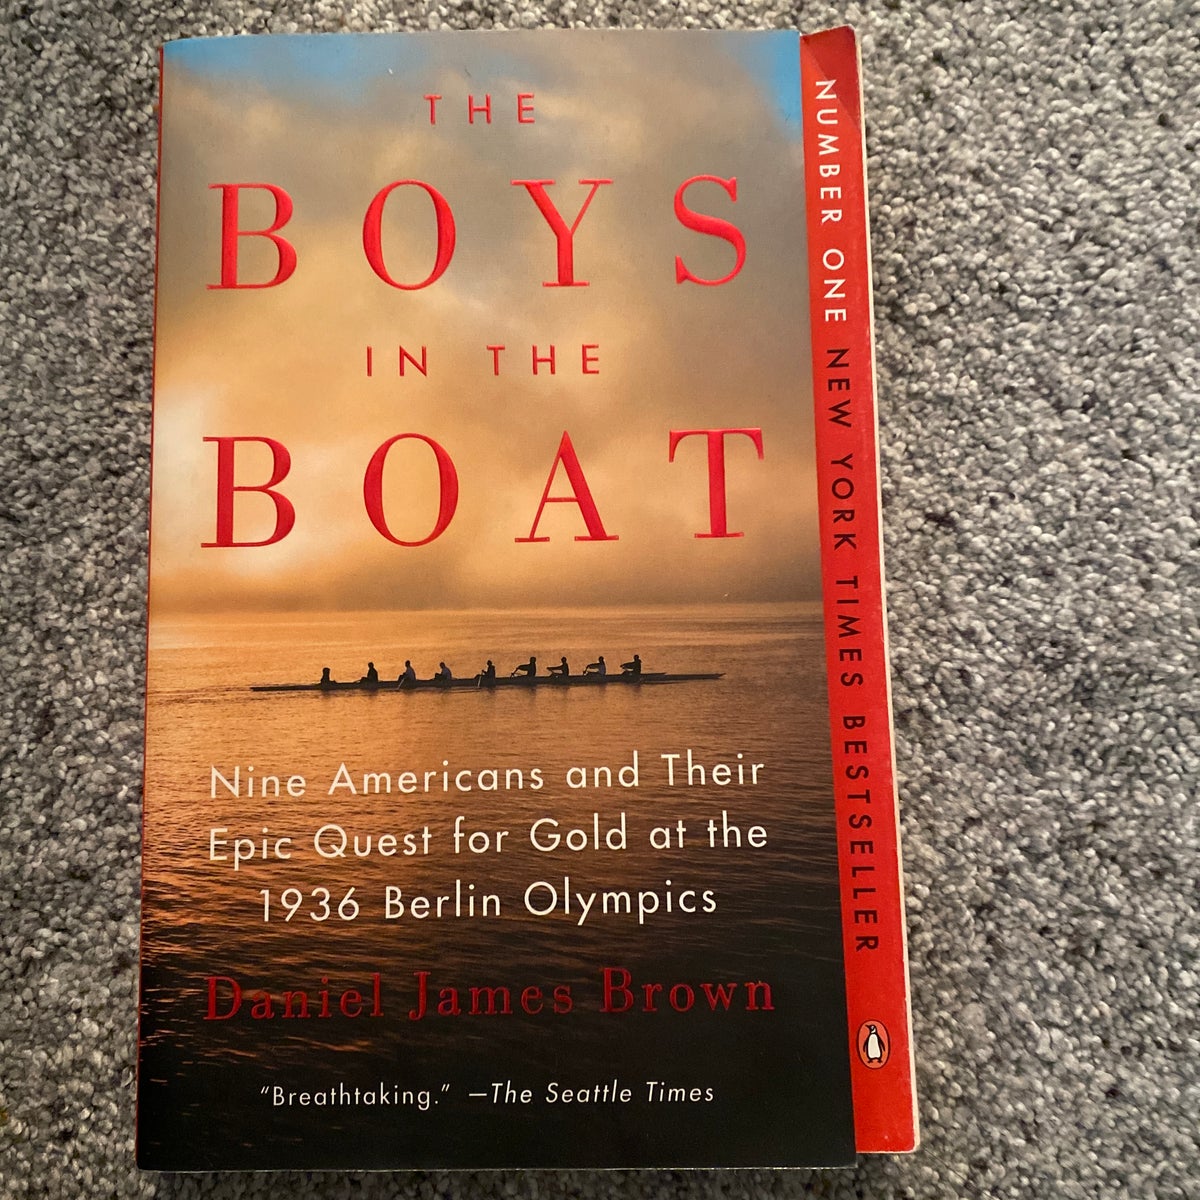 The Boys in the Boat by Daniel James Brown, Paperback